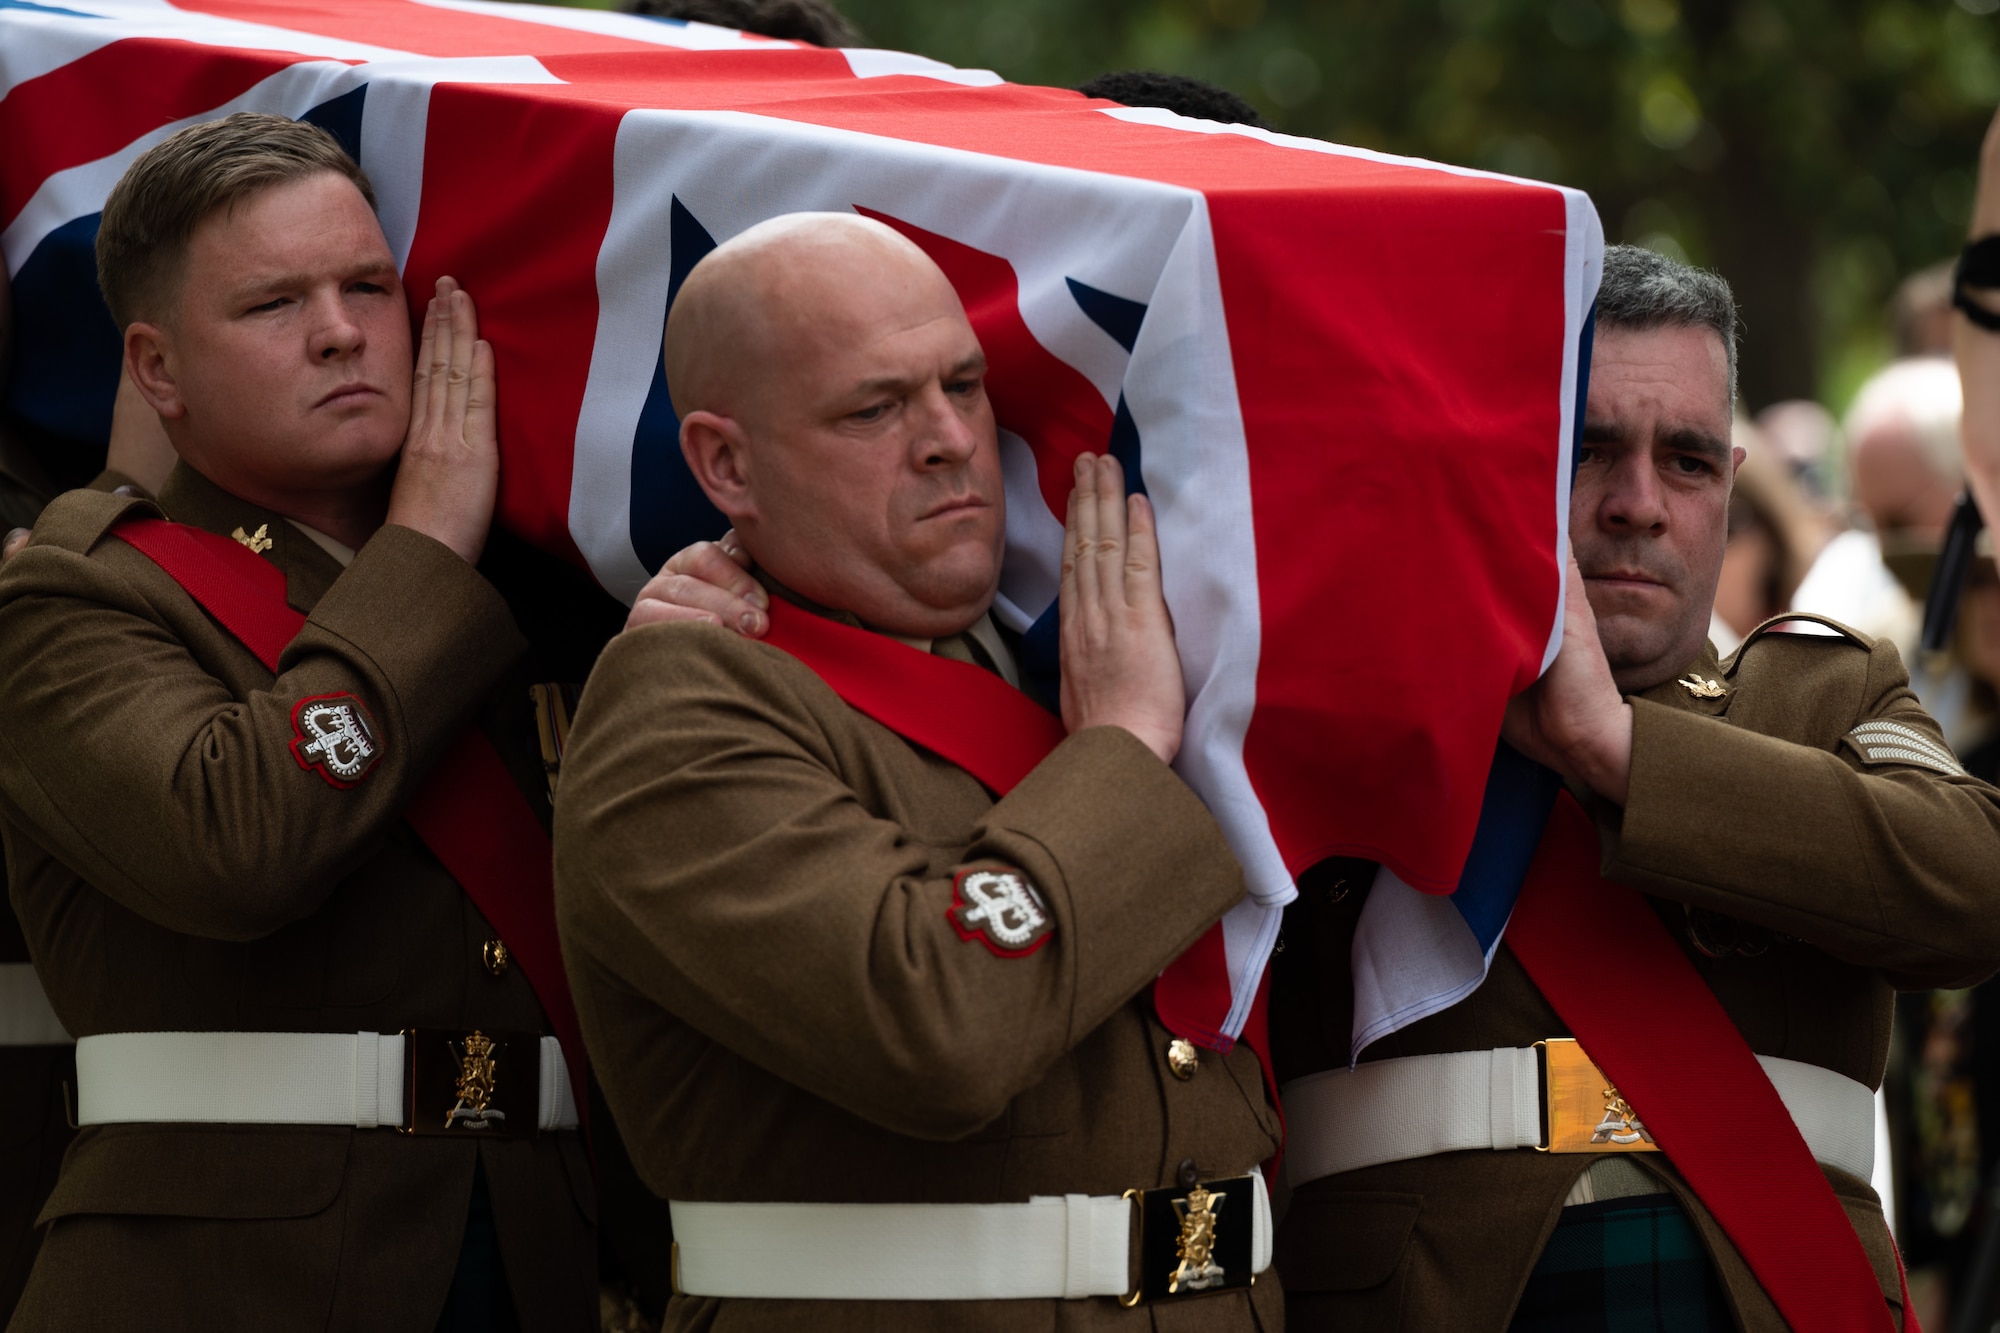 Members of the Scottish Army hold the casket of a fallen British Revolutionary War soldier.